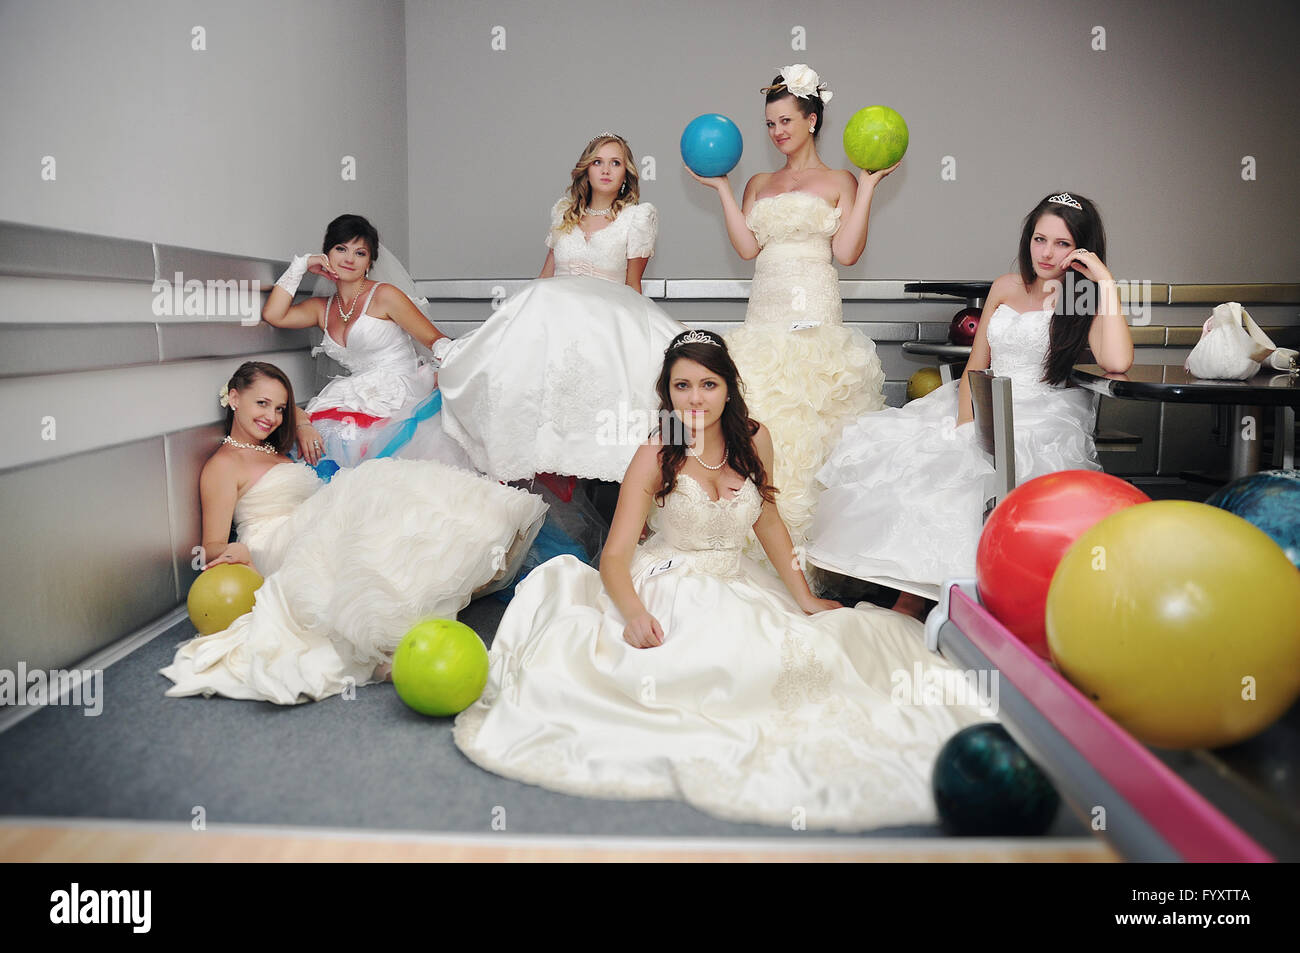 funny brides  on the bowling club Stock Photo